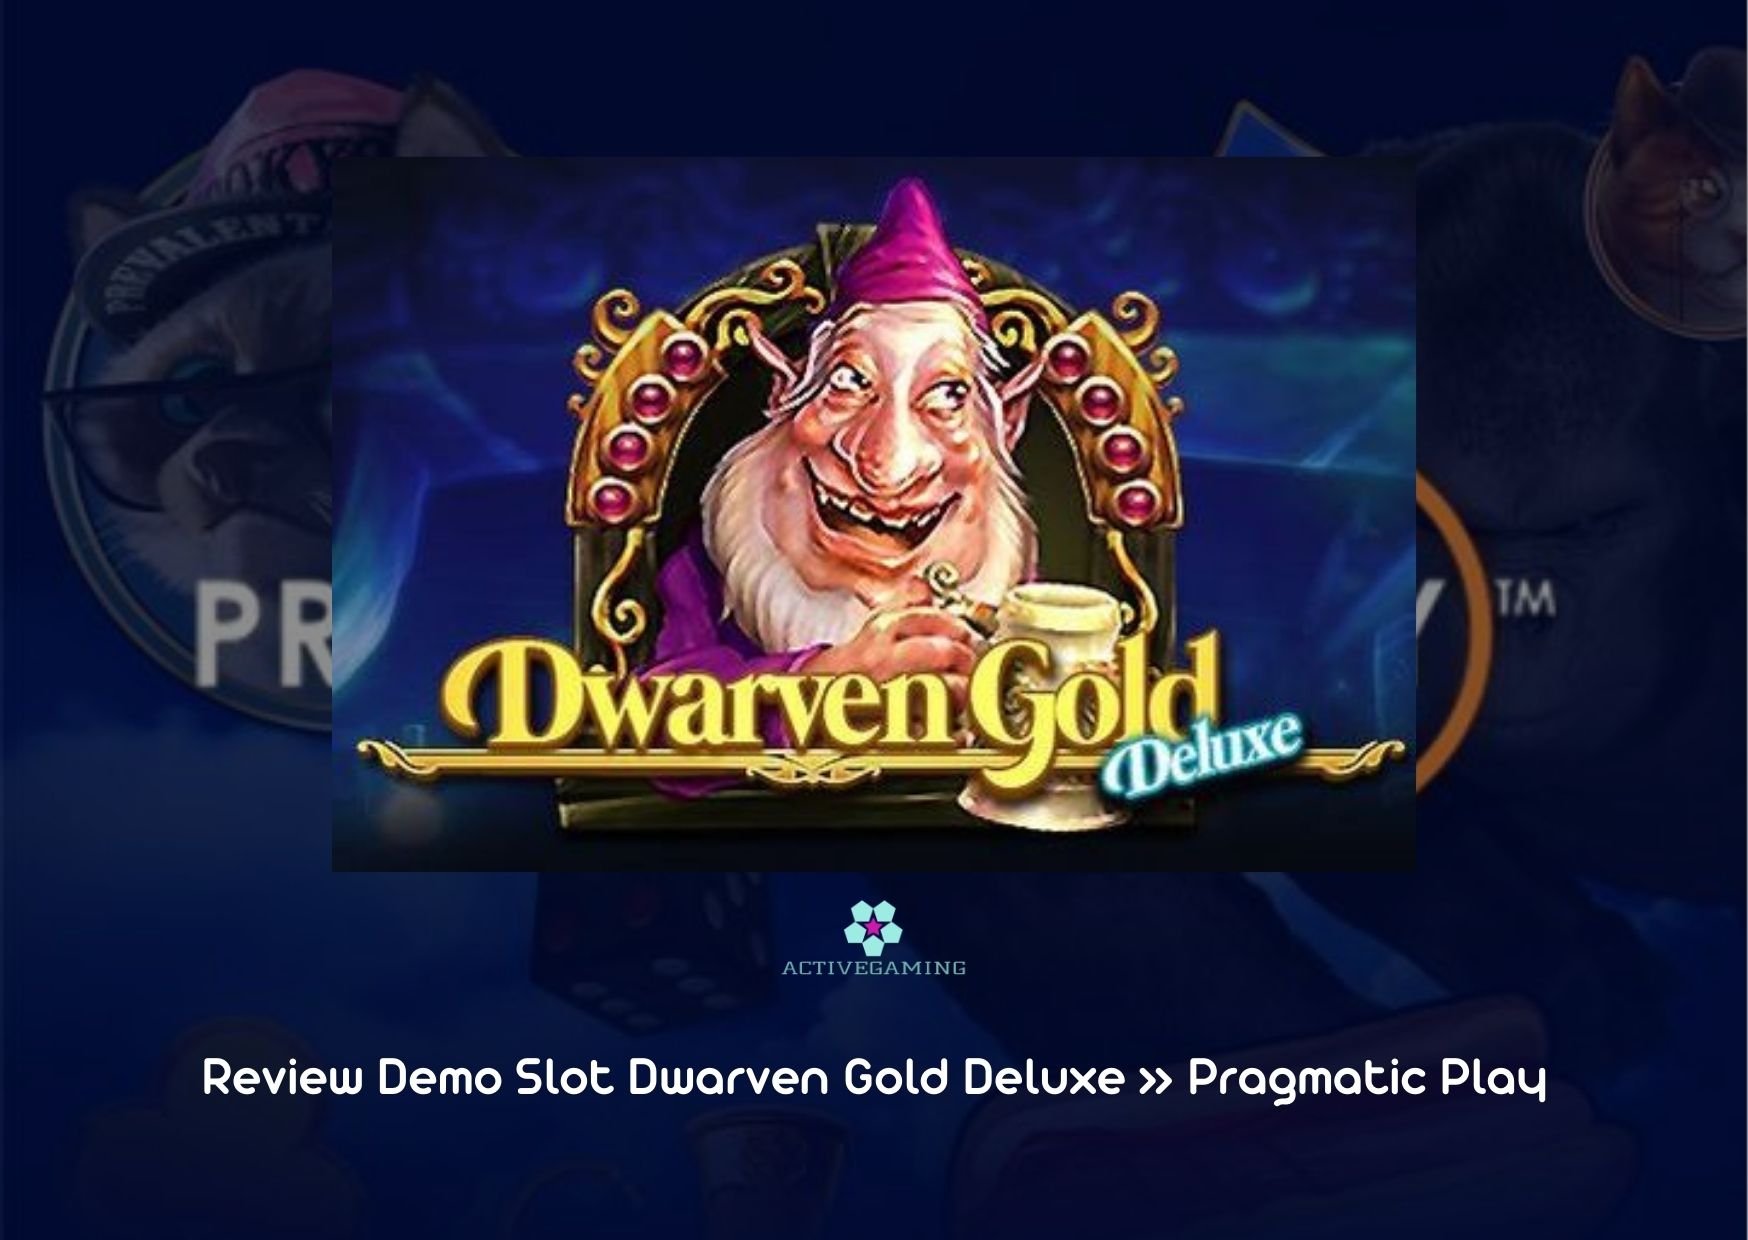 Review Demo Slot Dwarven Gold Deluxe » Pragmatic Play